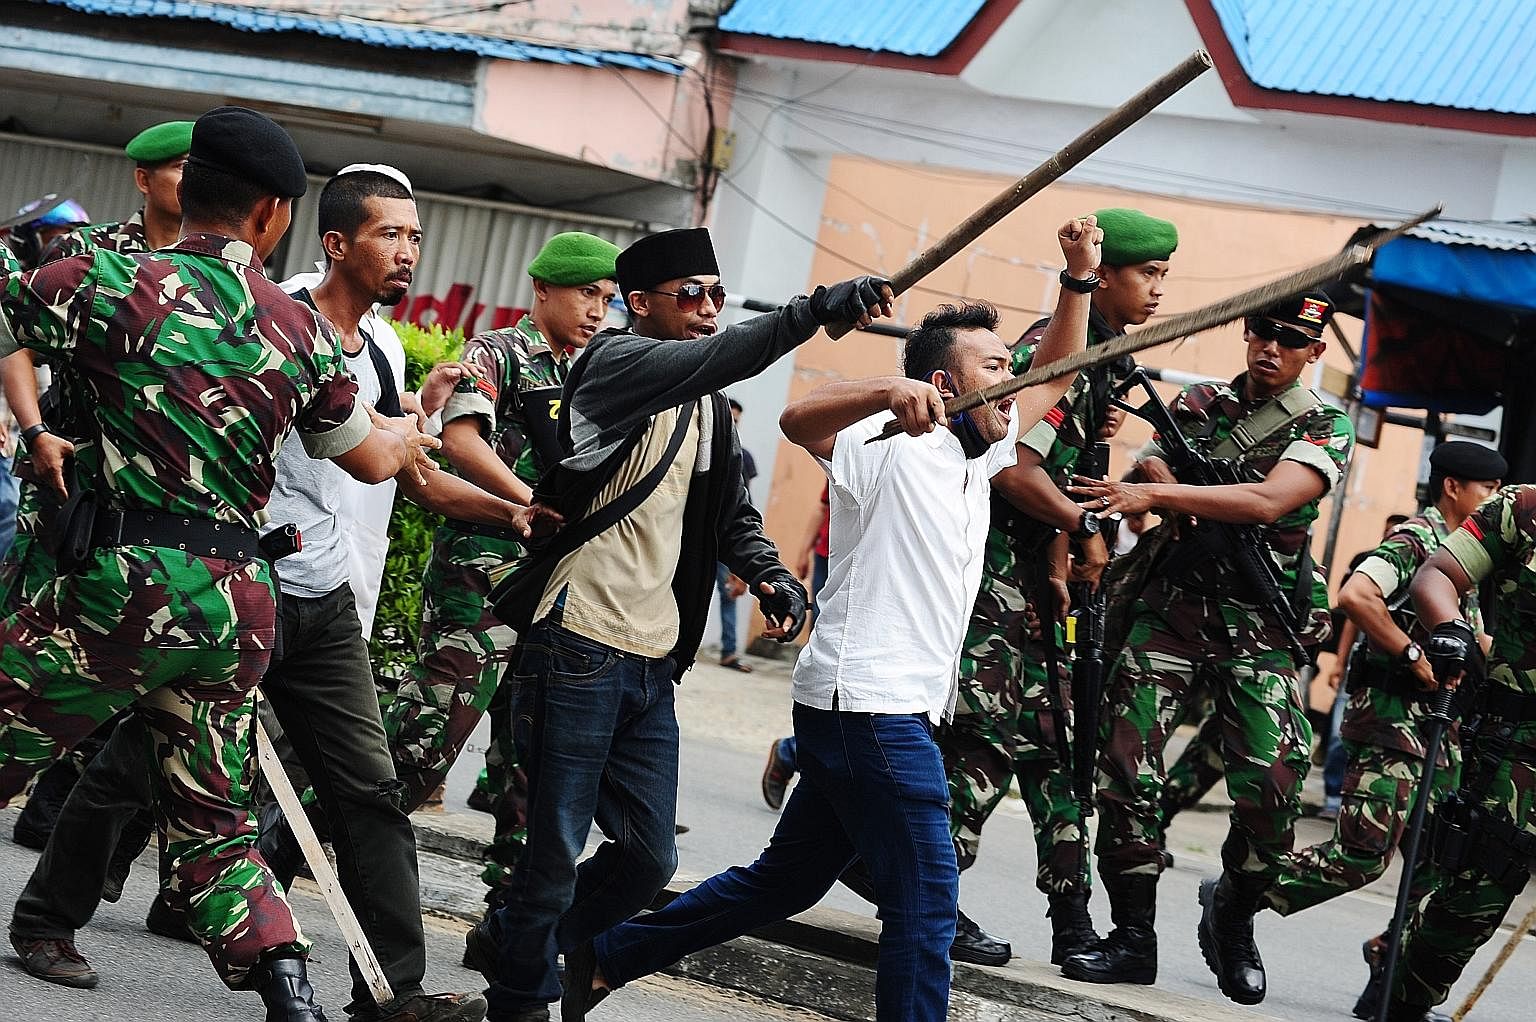 Indonesian hardline Muslim activists being restrained by military personnel as they shouted slogans during a local tribal festival in Pontianak, West Kalimantan province, on May 20. The divisive gubernatorial Jakarta election has brought up the quest